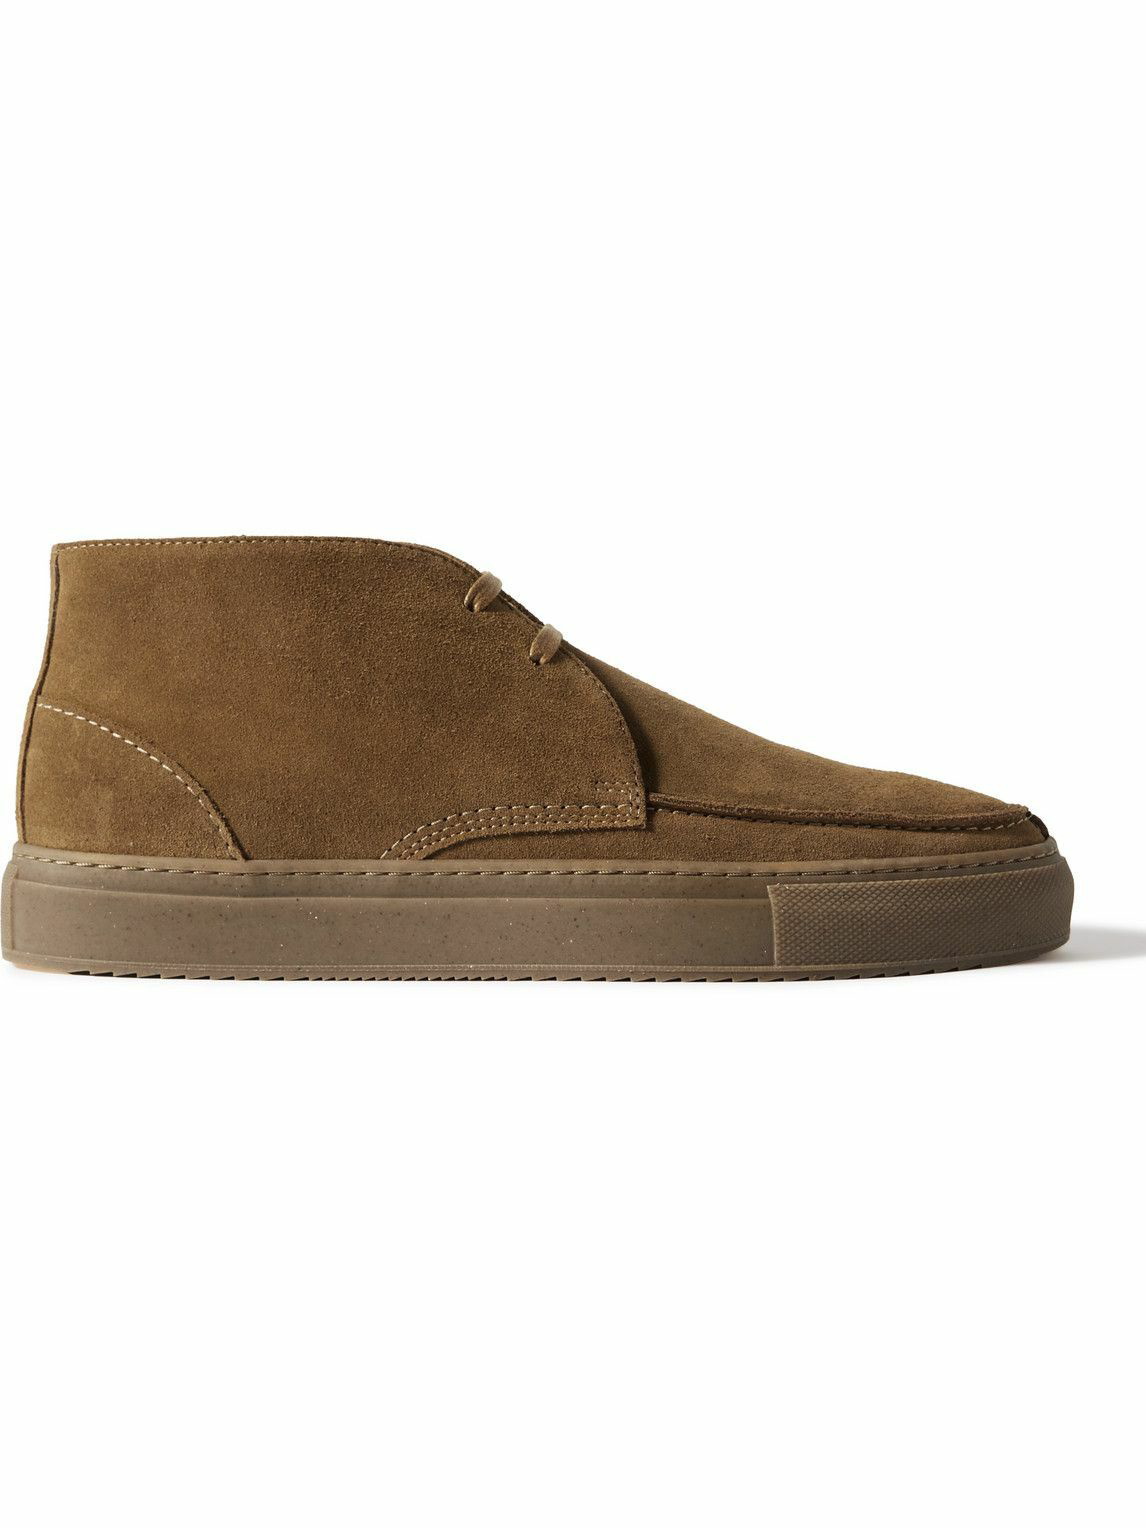 Mr P. - Larry Split-Toe Regenerated Suede by evolo® Chukka Boots ...